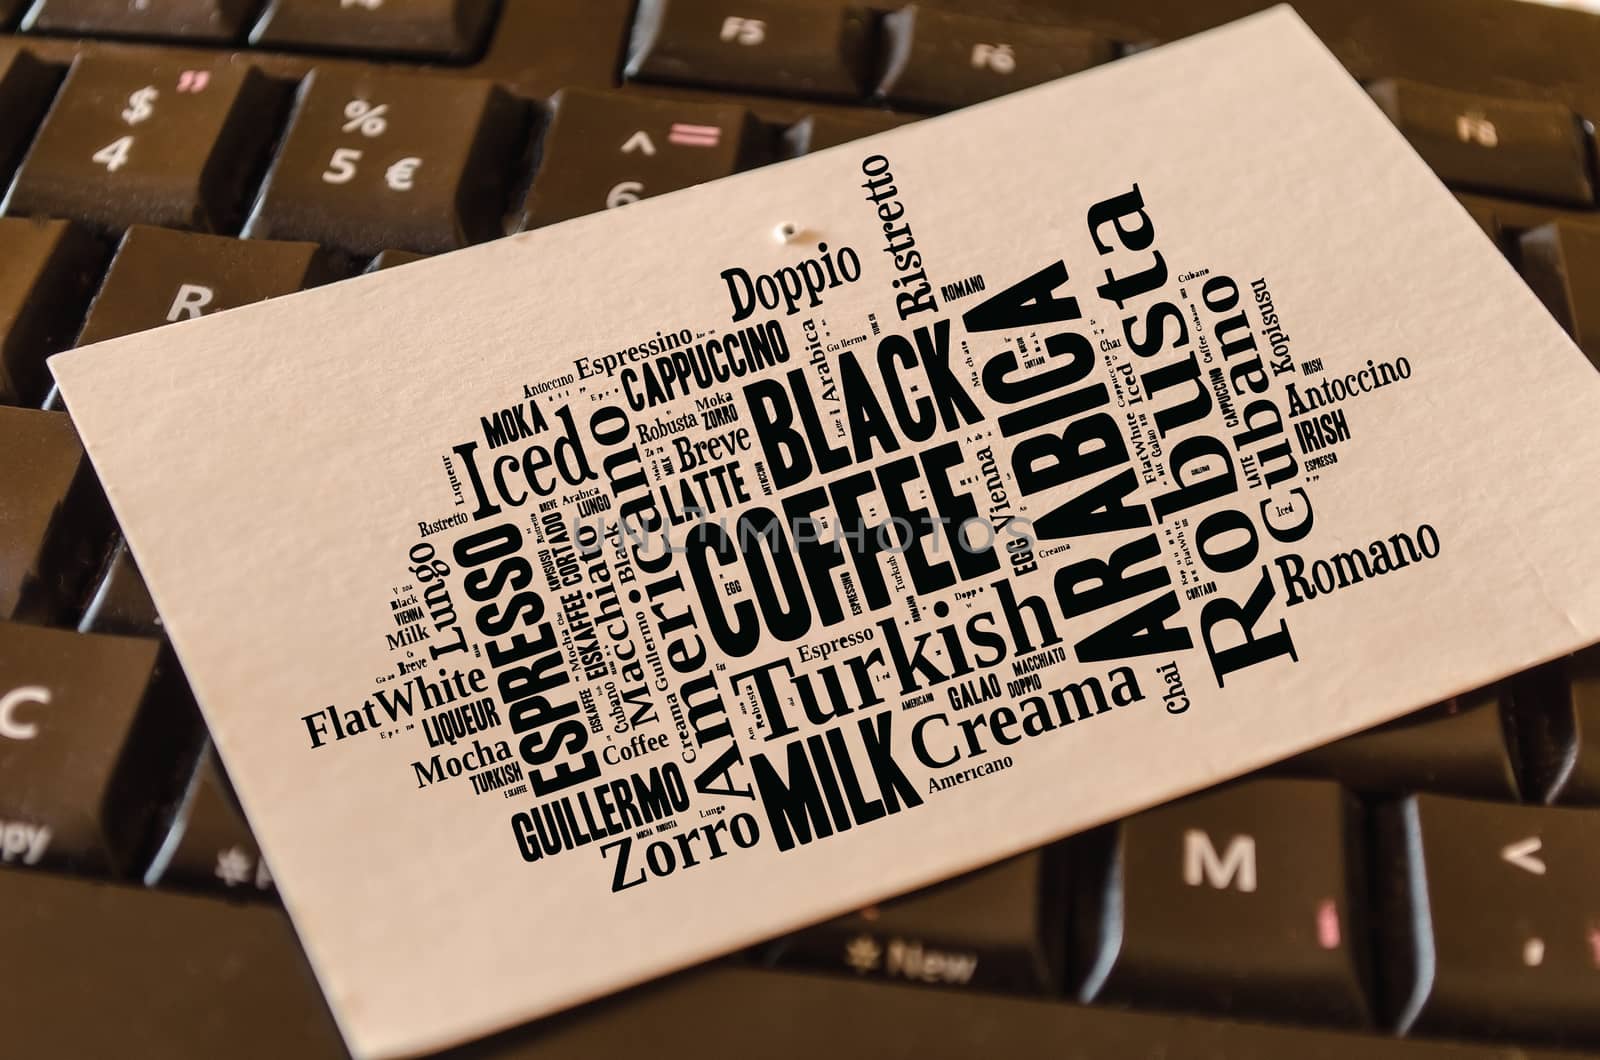 Coffee drinks words cloud collage over keyboard background